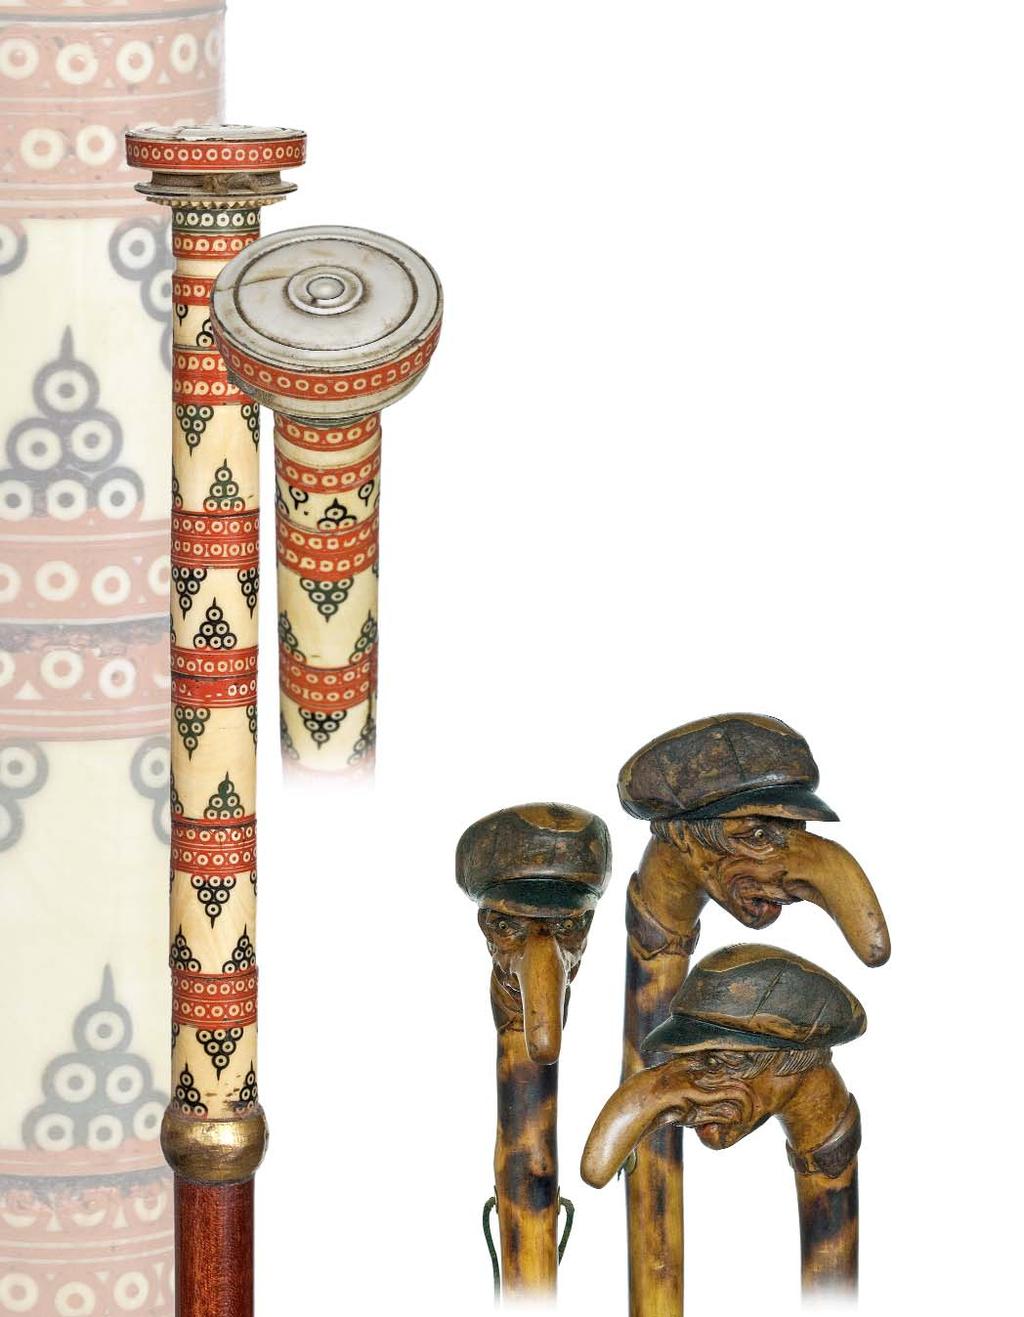 109. Ivory Dress Cane Anglo-Indian 19th Century-Very decorative straight segmented ivory handle with a beautifully turned knob profusely decorated with red, green and black lacquer inlay.